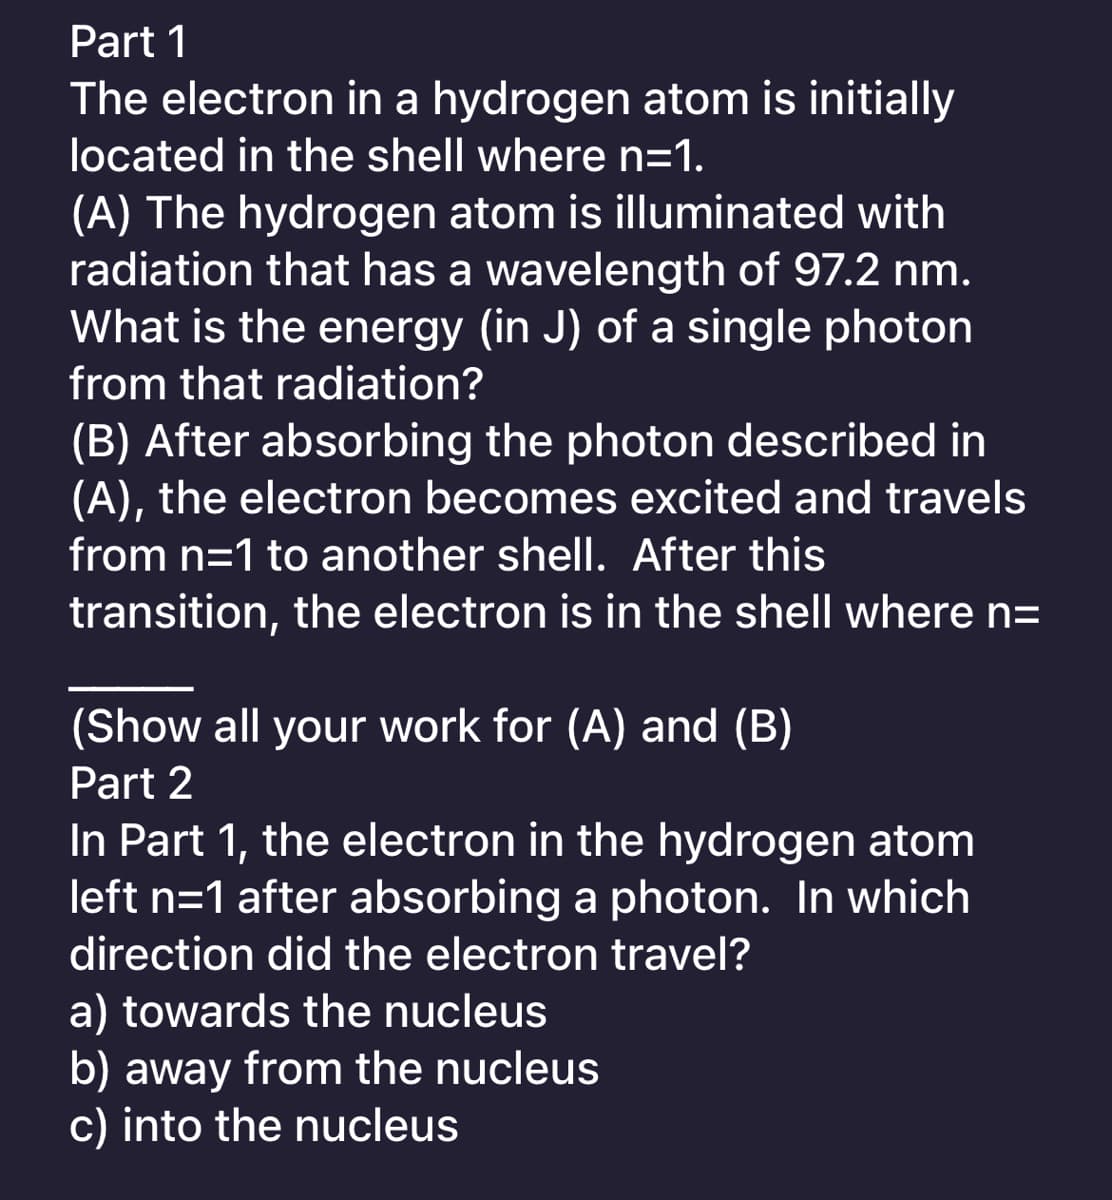 Part 1
The electron in a hydrogen atom is initially
located in the shell where n=1.
(A) The hydrogen atom is illuminated with
radiation that has a wavelength of 97.2 nm.
What is the energy (in J) of a single photon
from that radiation?
(B) After absorbing the photon described in
(A), the electron becomes excited and travels
from n=1 to another shell. After this
transition, the electron is in the shell where n=
(Show all your work for (A) and (B)
Part 2
In Part 1, the electron in the hydrogen atom
left n=1 after absorbing a photon. In which
direction did the electron travel?
a) towards the nucleus
b) away from the nucleus
c) into the nucleus